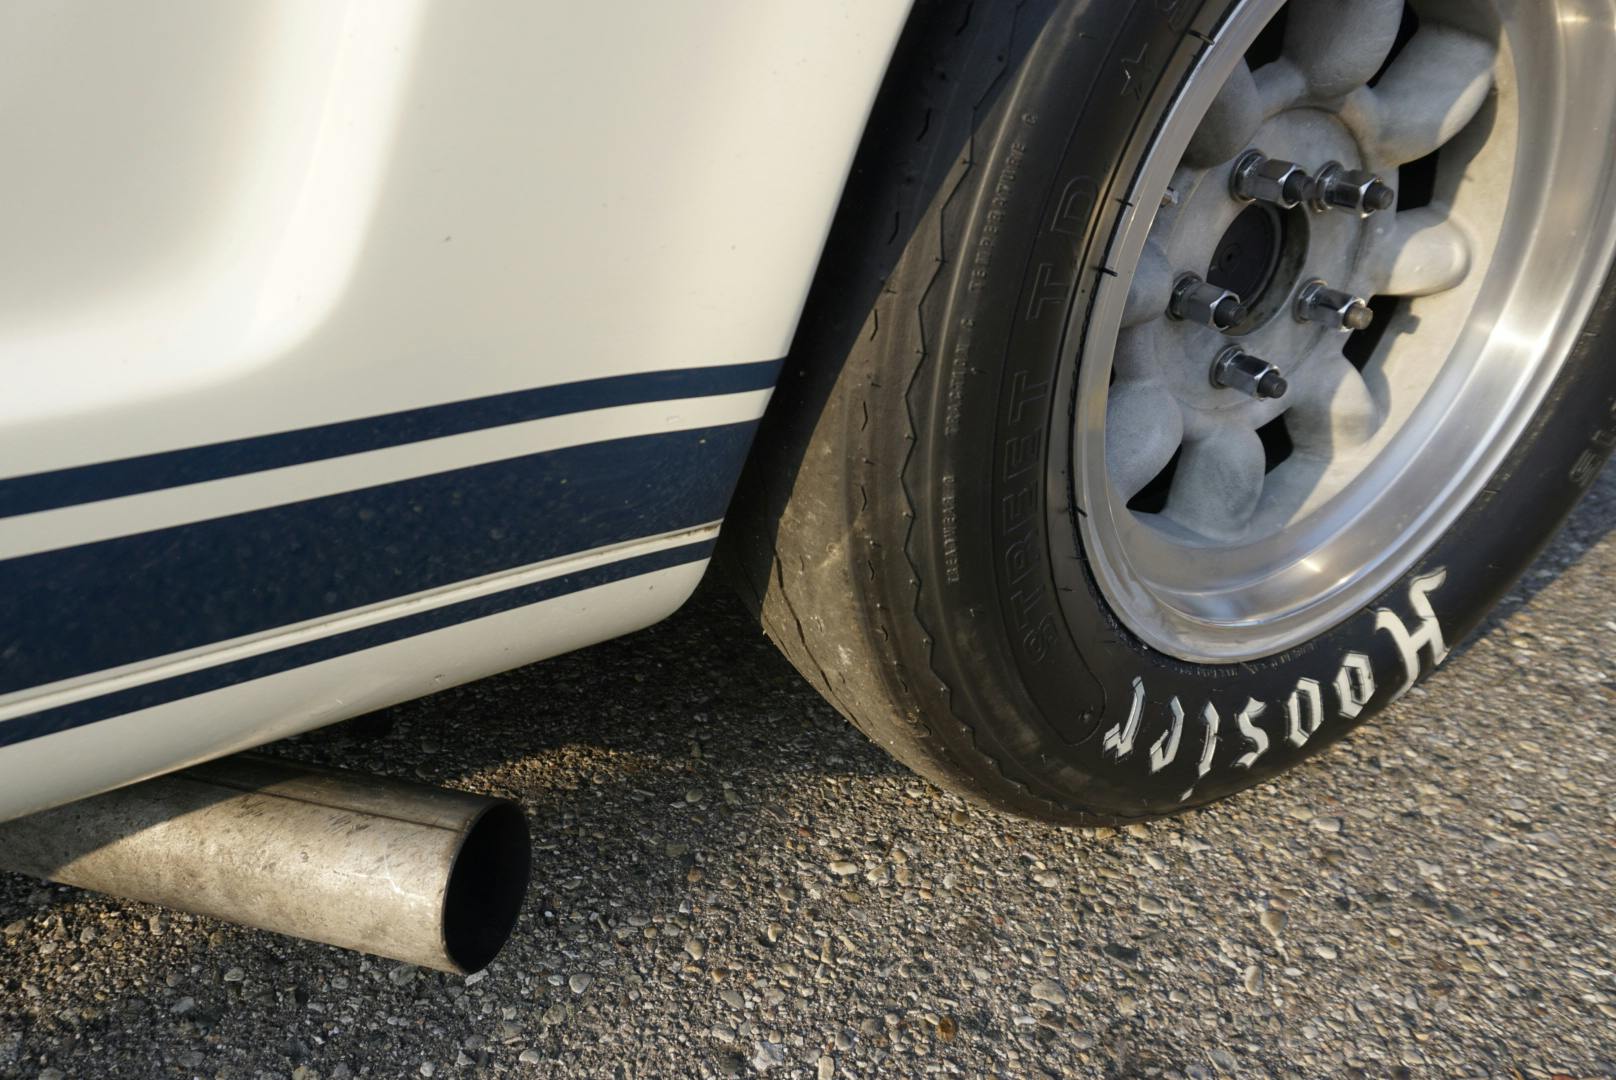 1965 Shelby GT350 Mustang side exhaust